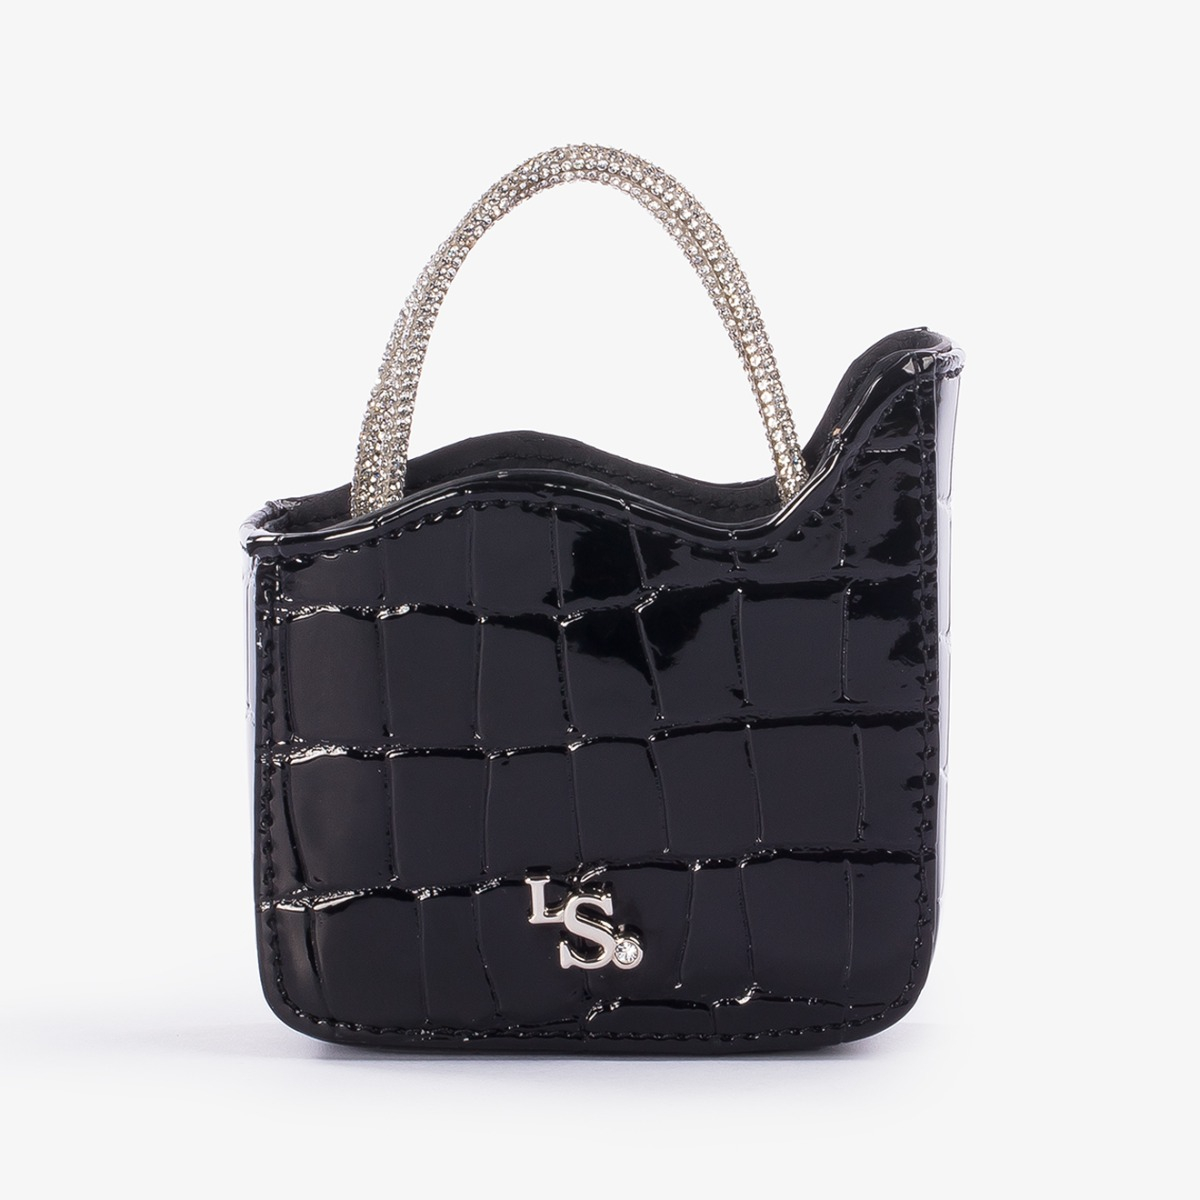 MICRO SAC IVY - Le Silla | Official Online Store